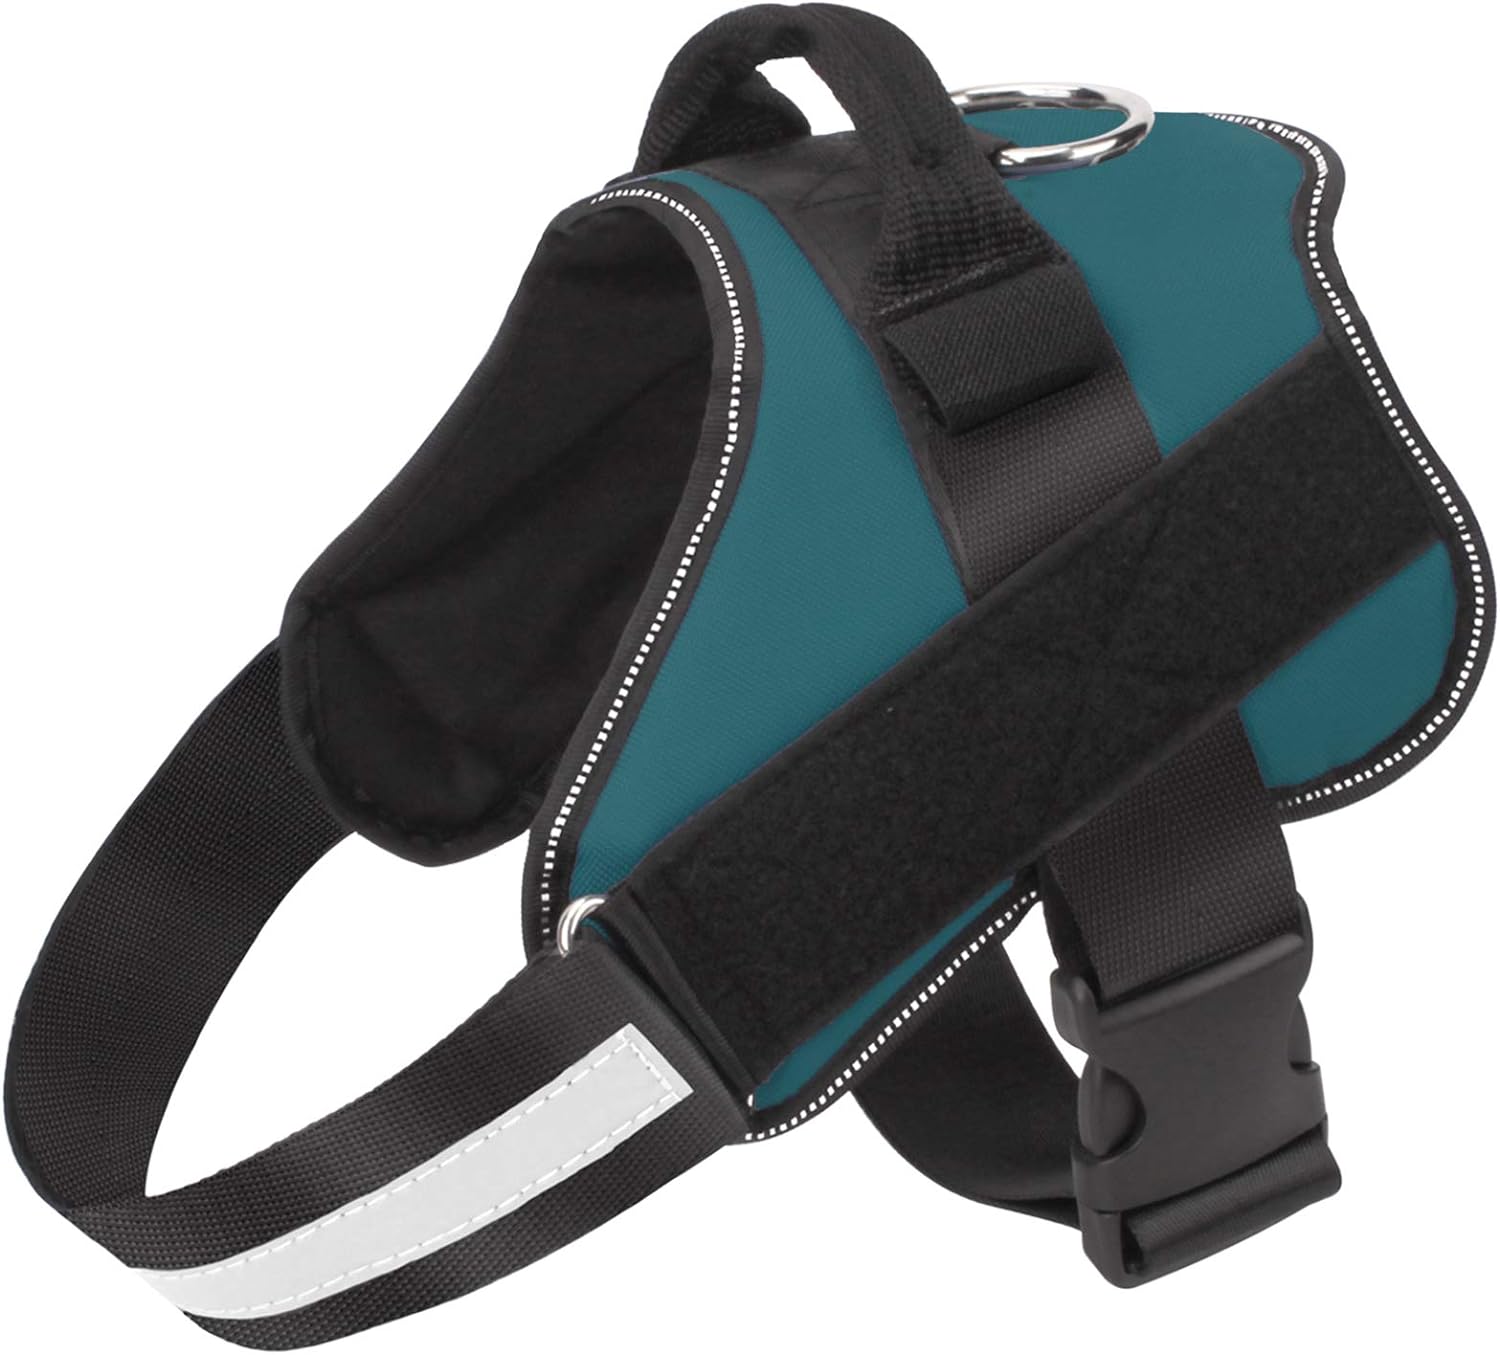 Bolux Dog Harness, No-Pull Reflective Dog Vest, Breathable Adjustable Pet Harness with Handle for Outdoor Walking - No More Pulling, Tugging or Choking (Turquoise, L)